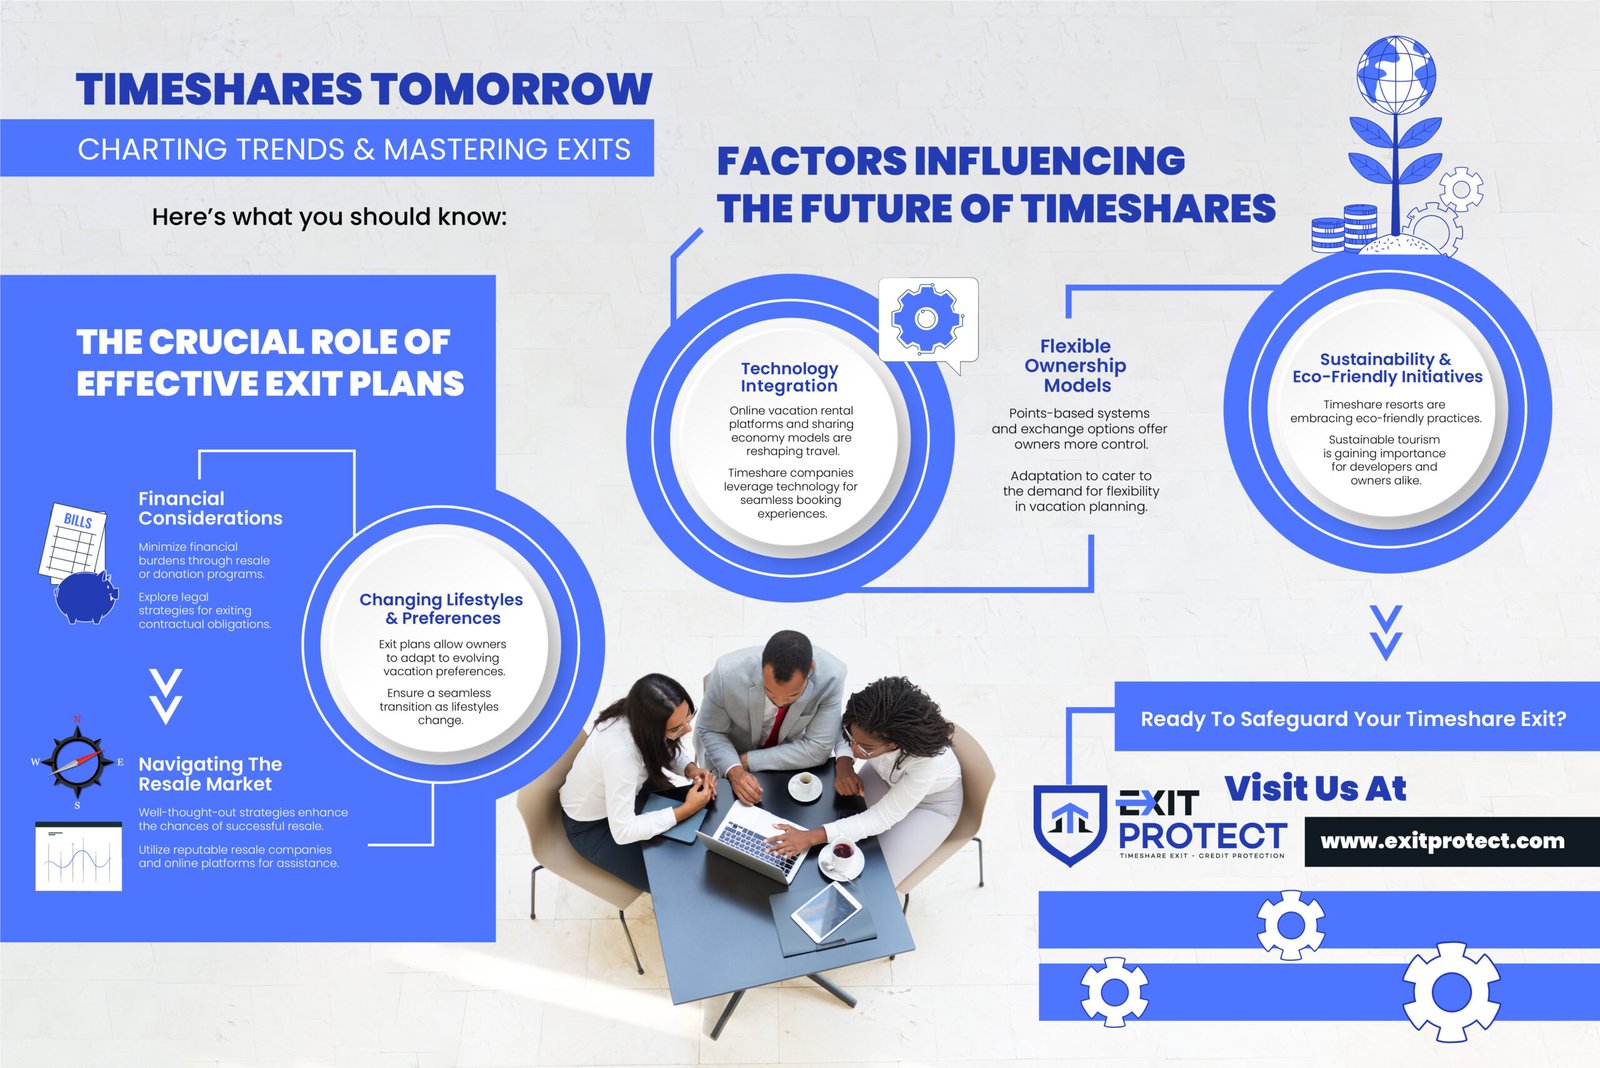 Factors influencing the future of timeshares